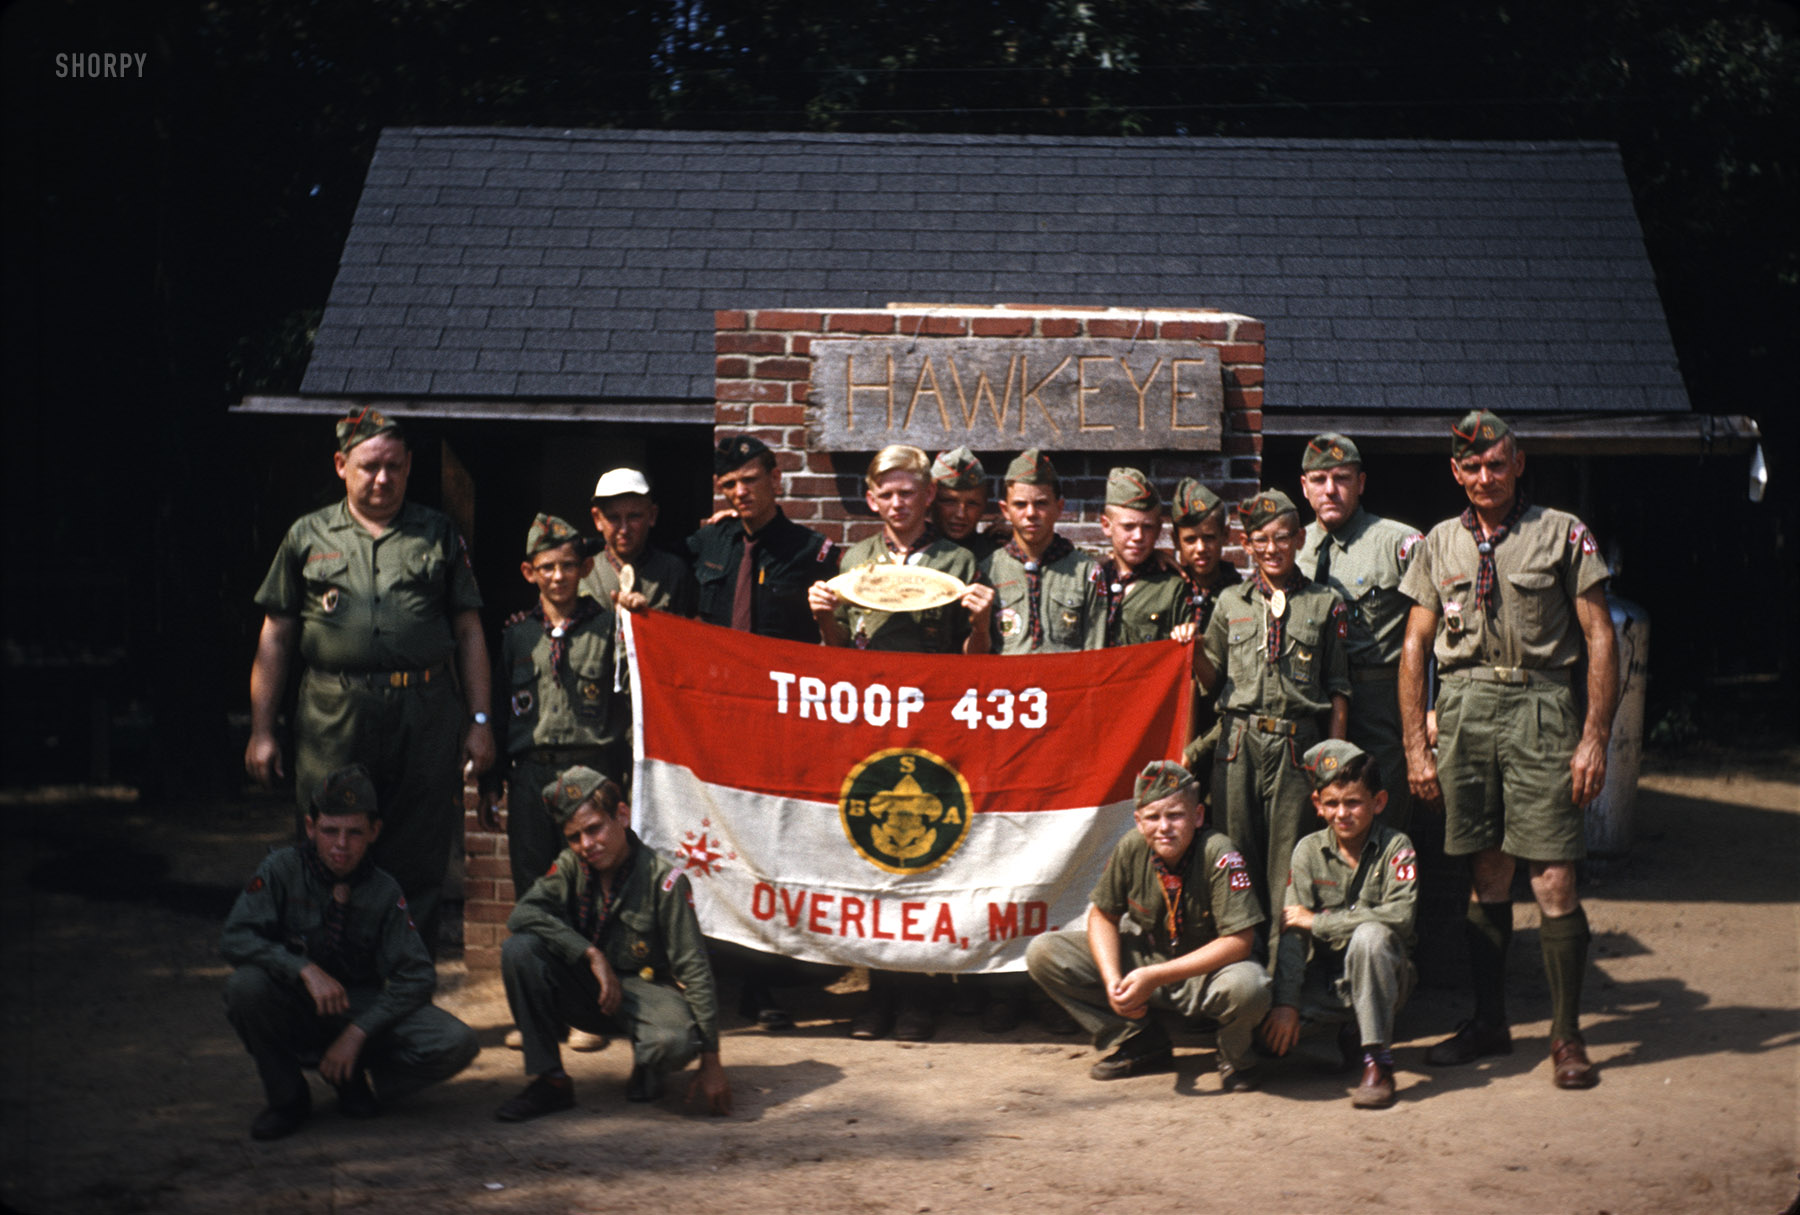 "Boy Scouts 1956." Our young friend Kermy is holding the flag on the right in this Kodachrome slide found on eBay. View full size.